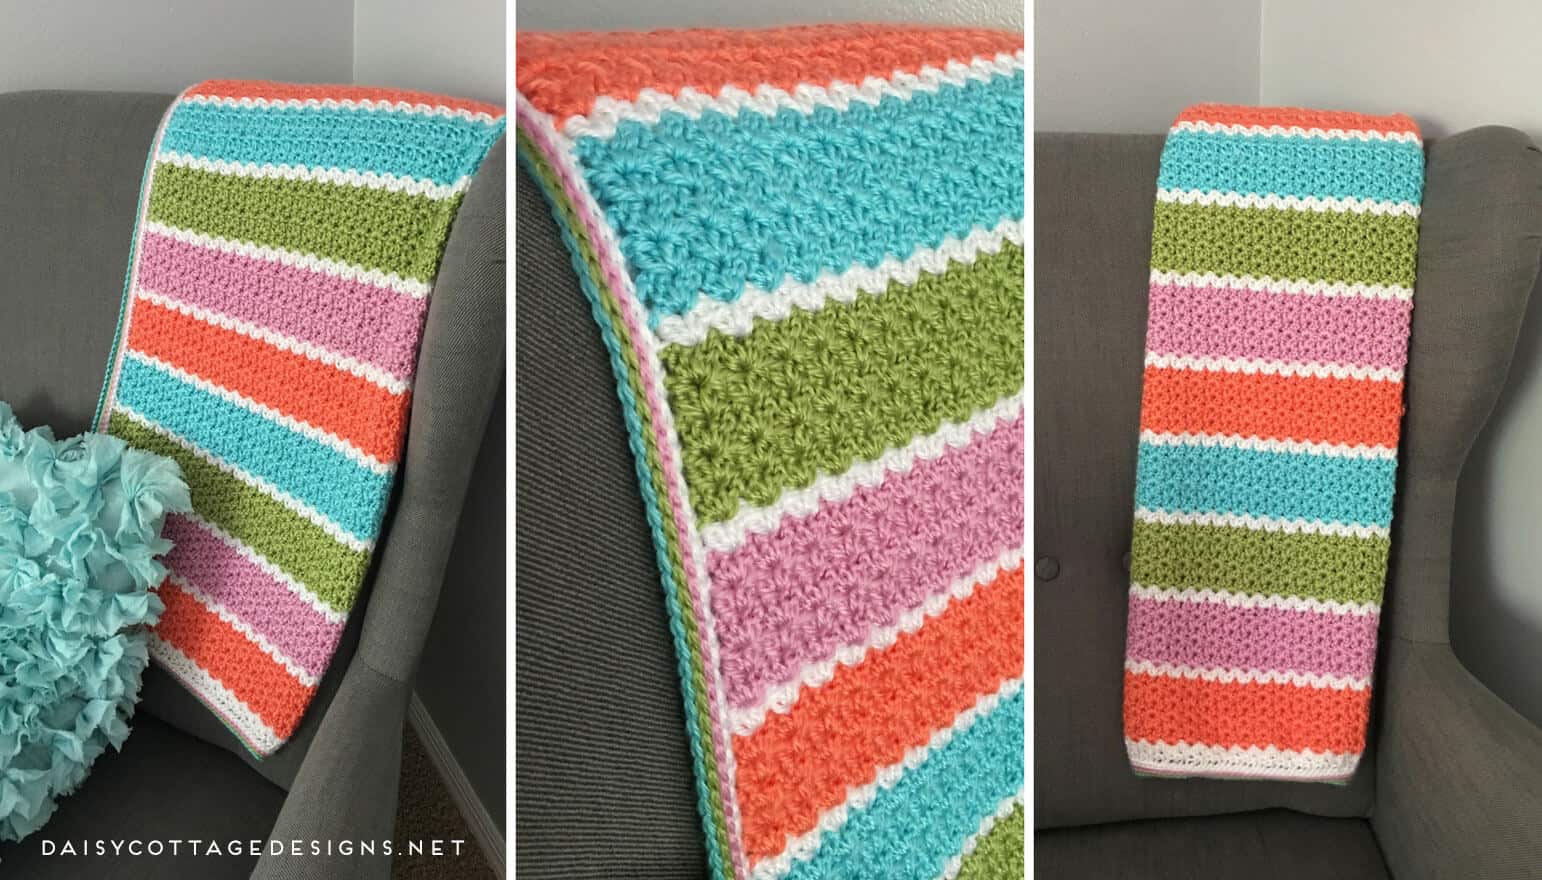 If you're looking for a free crochet blanket pattern that works up quickly, this easy v-stitch blanket from Daisy Cottage Designs is the way to go! | free crochet pattern, easy crochet blanket pattern, striped baby blanket pattern